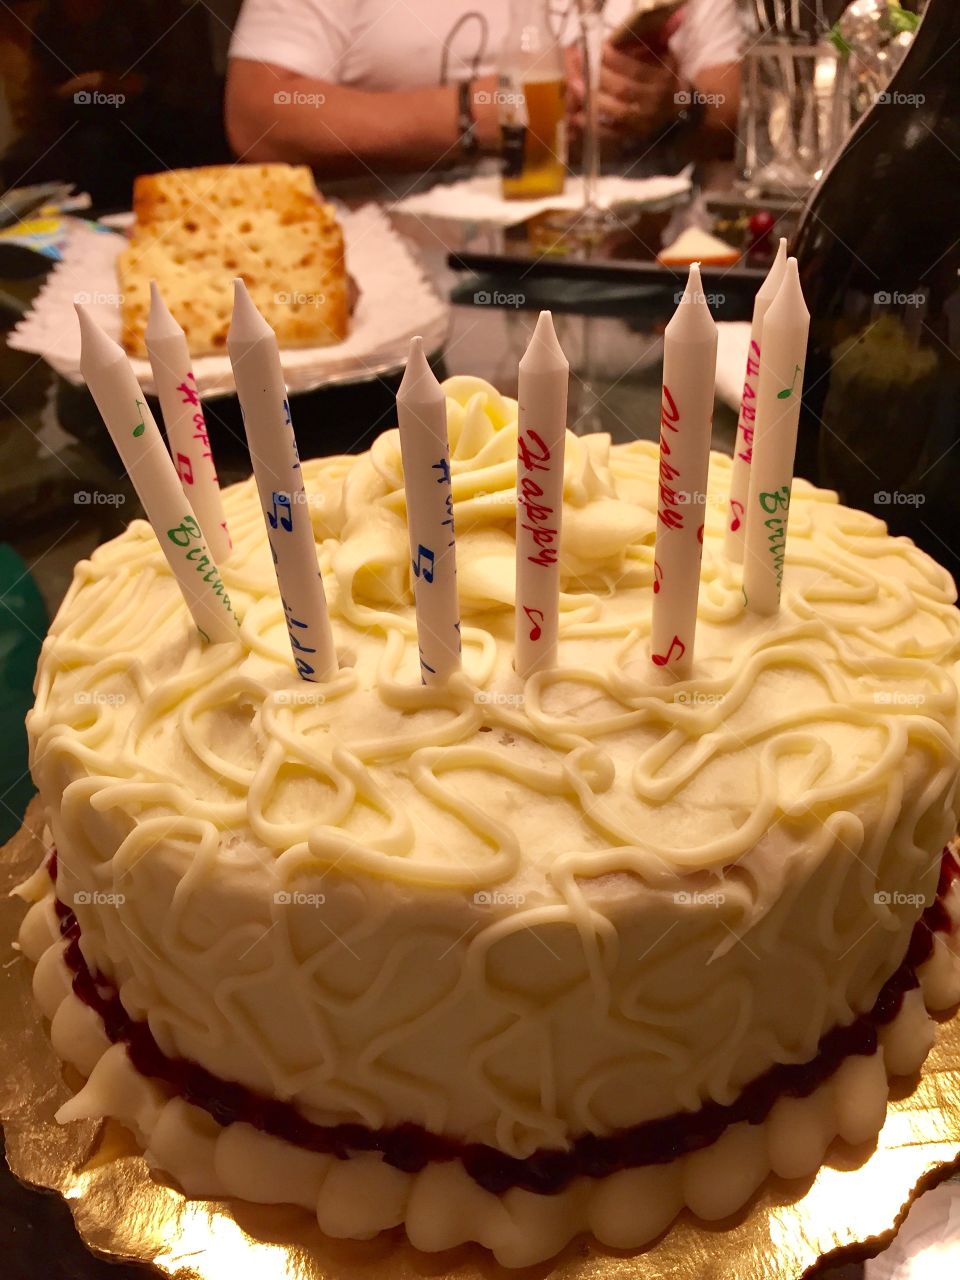 Candles don't match but I love how they look in this cake